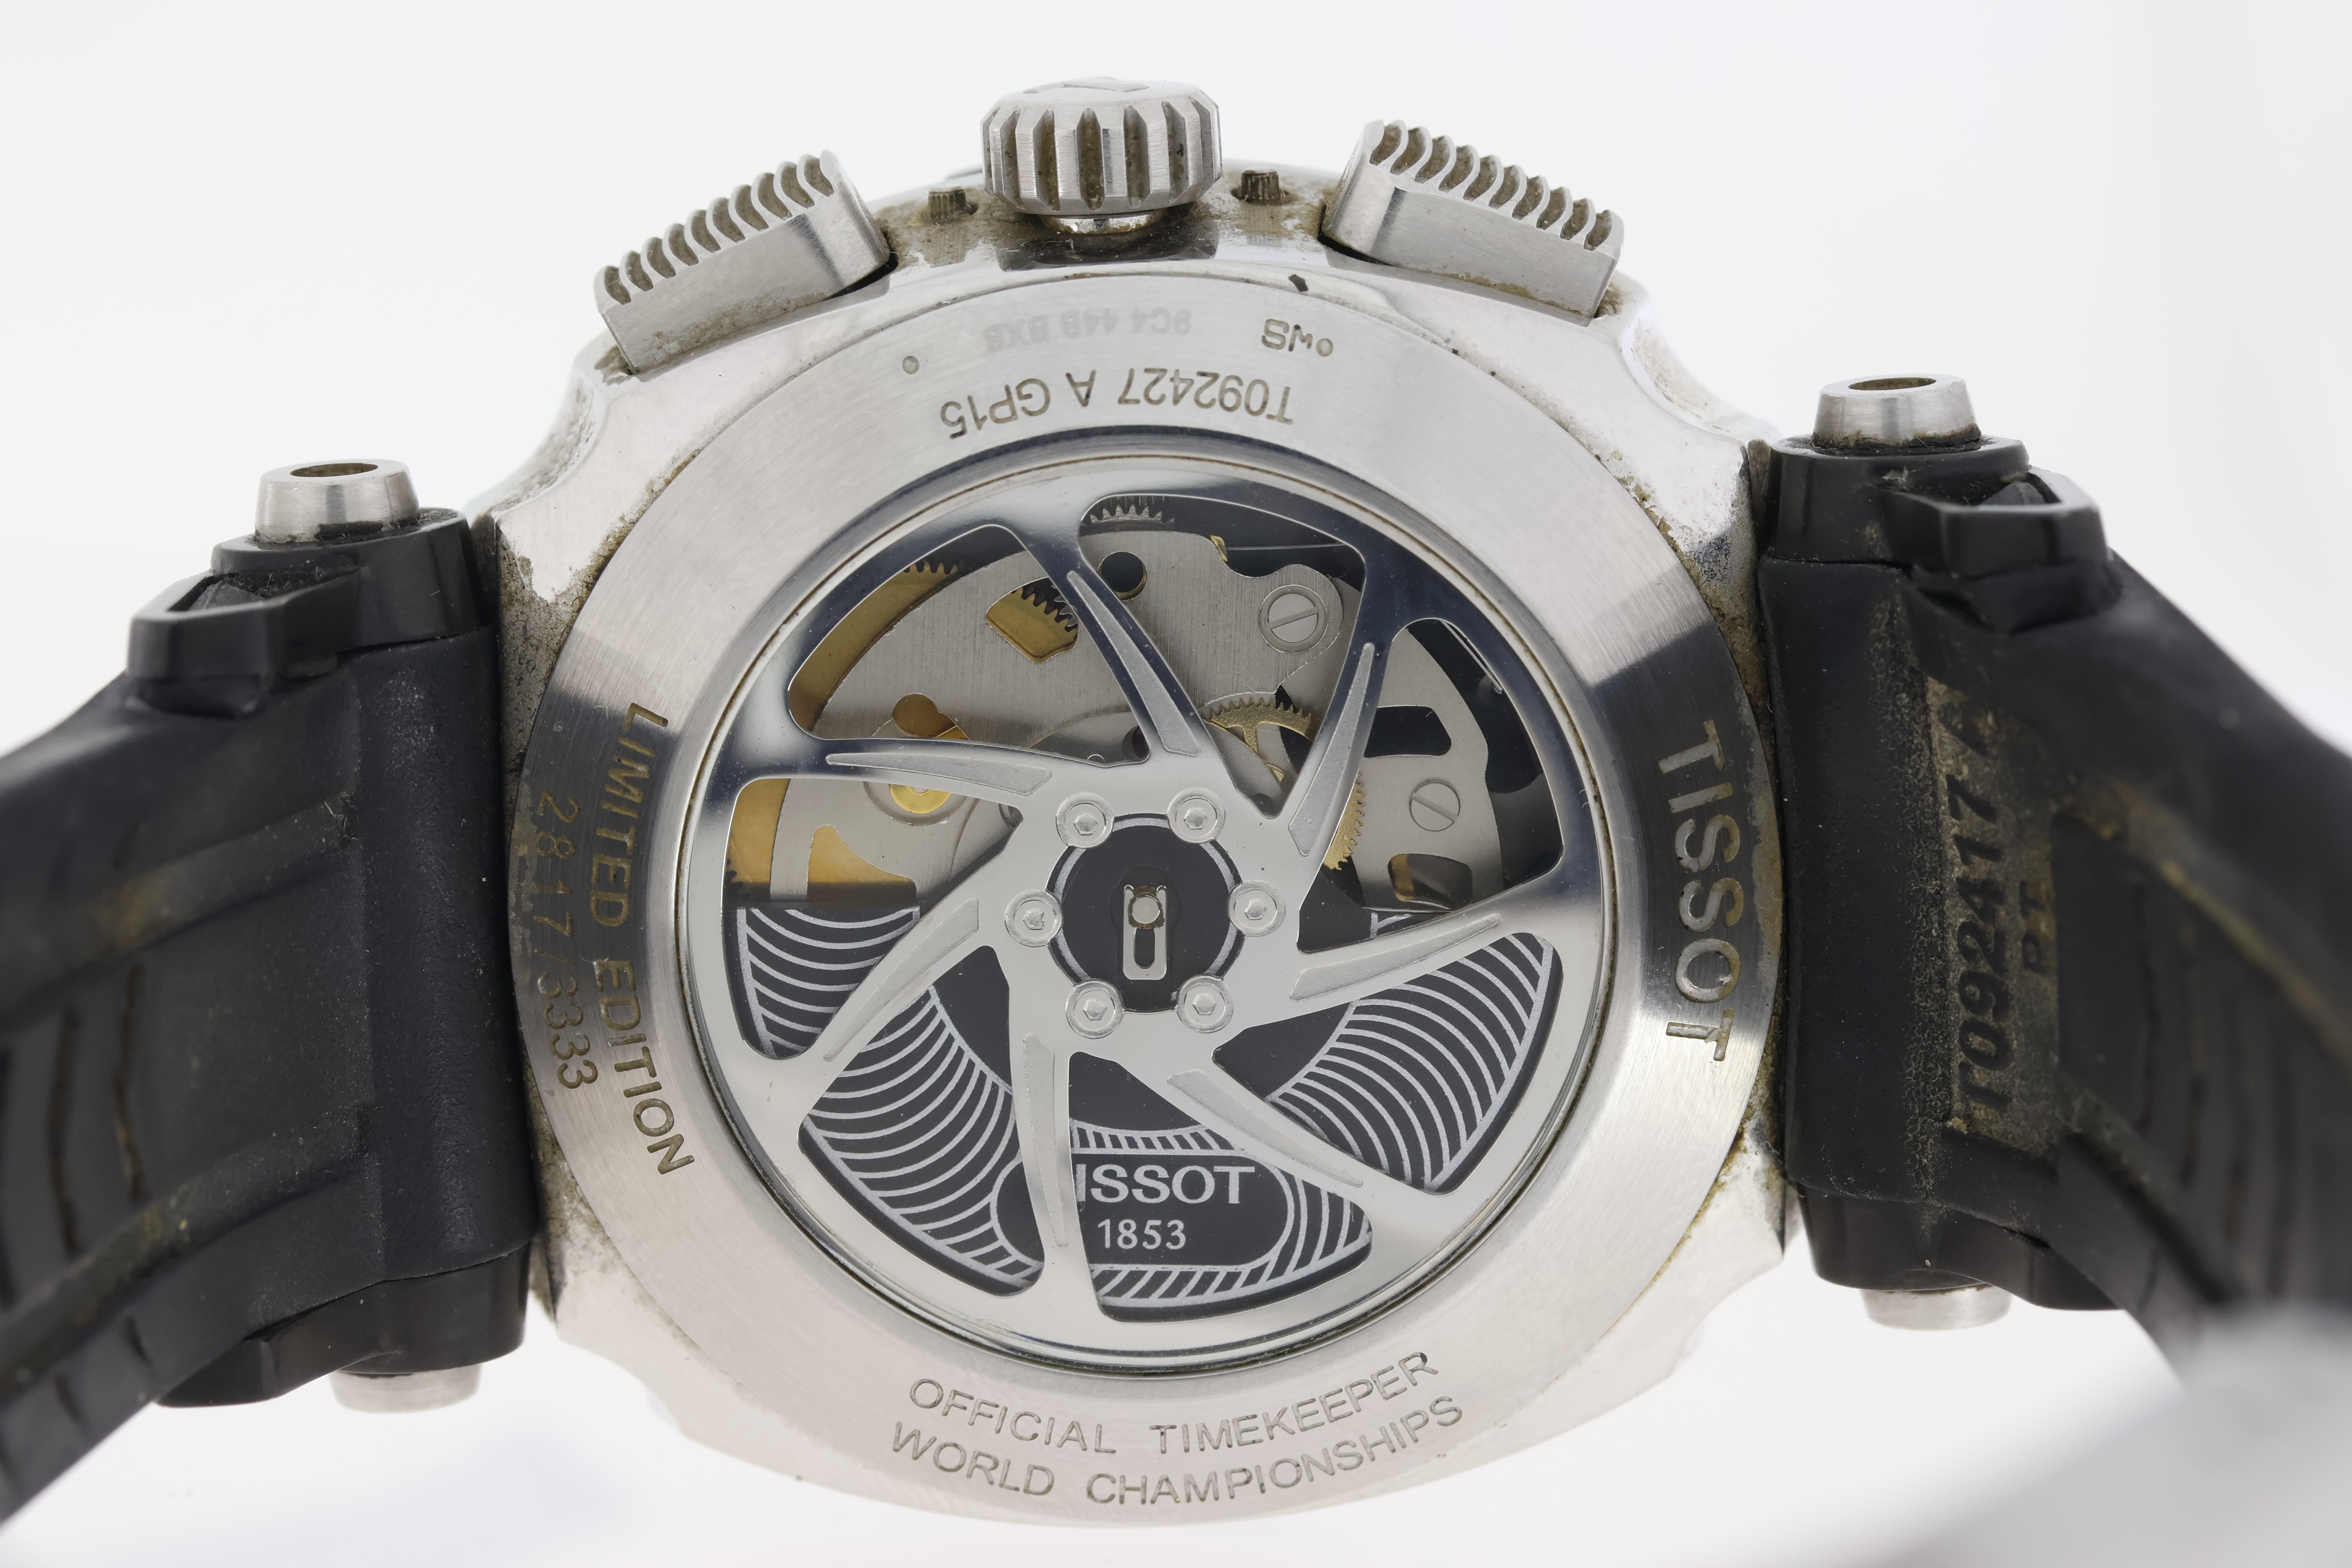 Tissot T-Race Limited Edition Moto GP World Championships Chronograph Automatic - Image 3 of 3